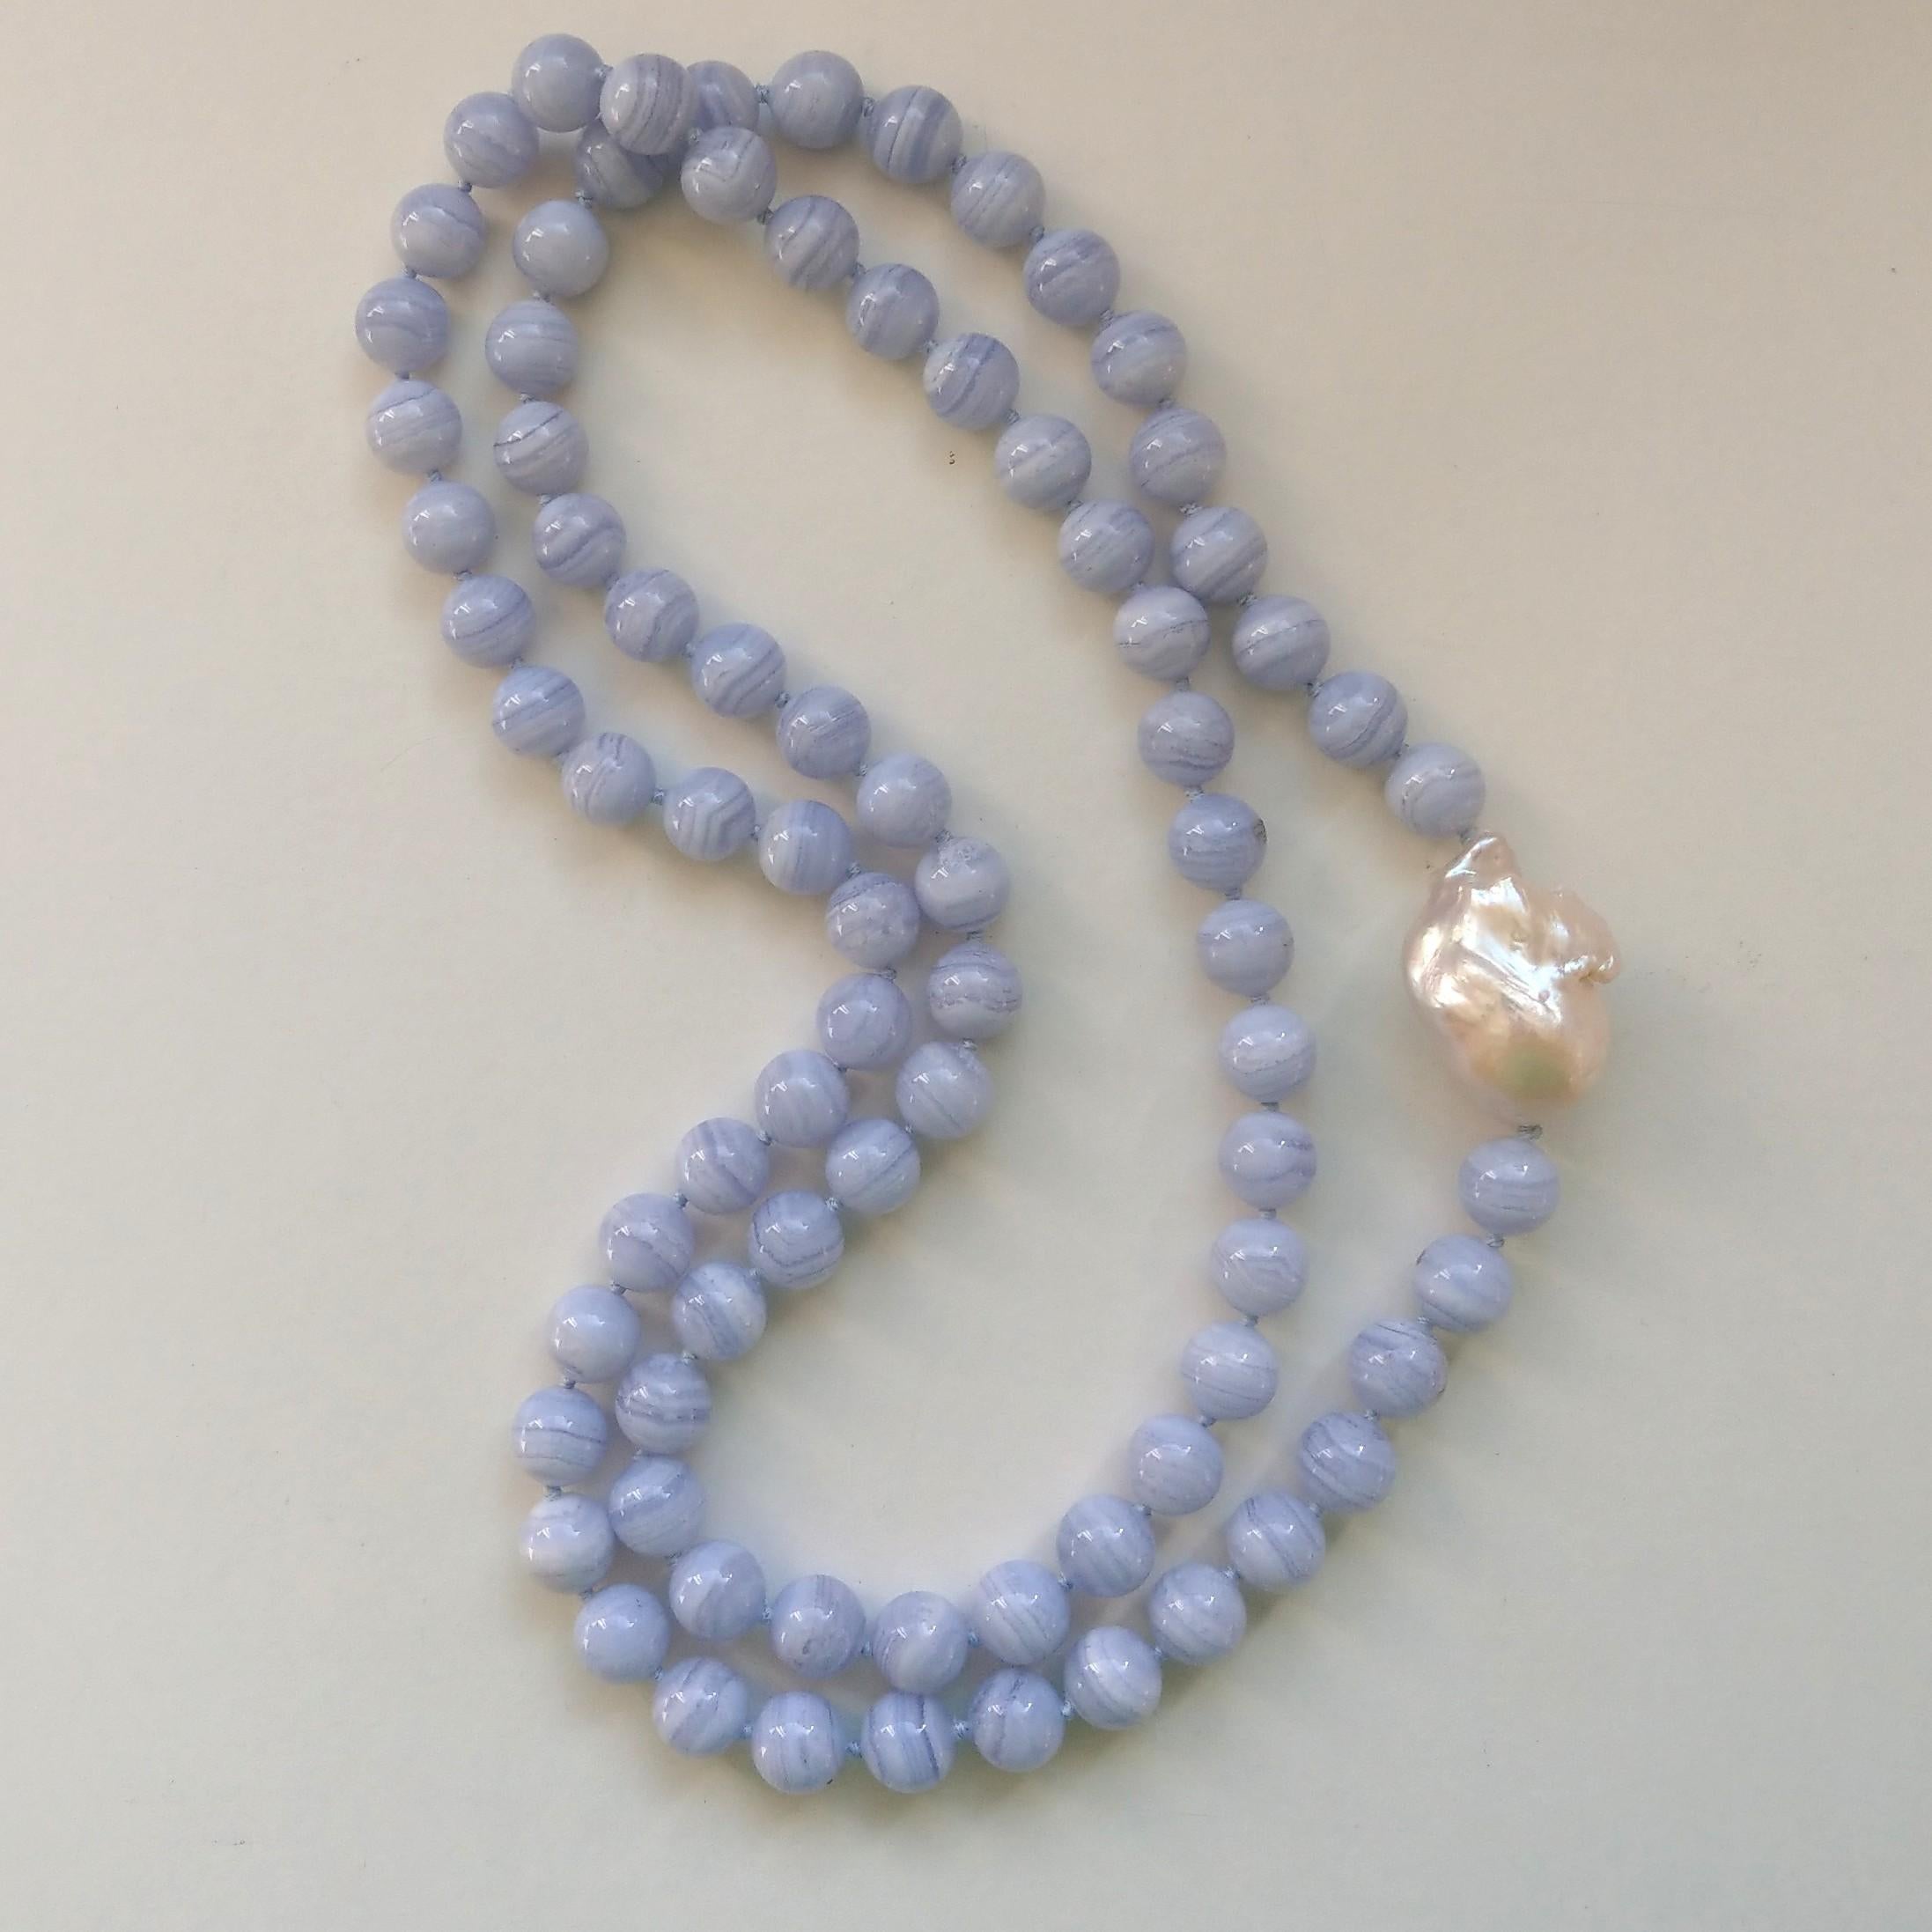 Modern Decadent Jewels Blue Lace Agate with a large Baroque Pearl matinee Necklace